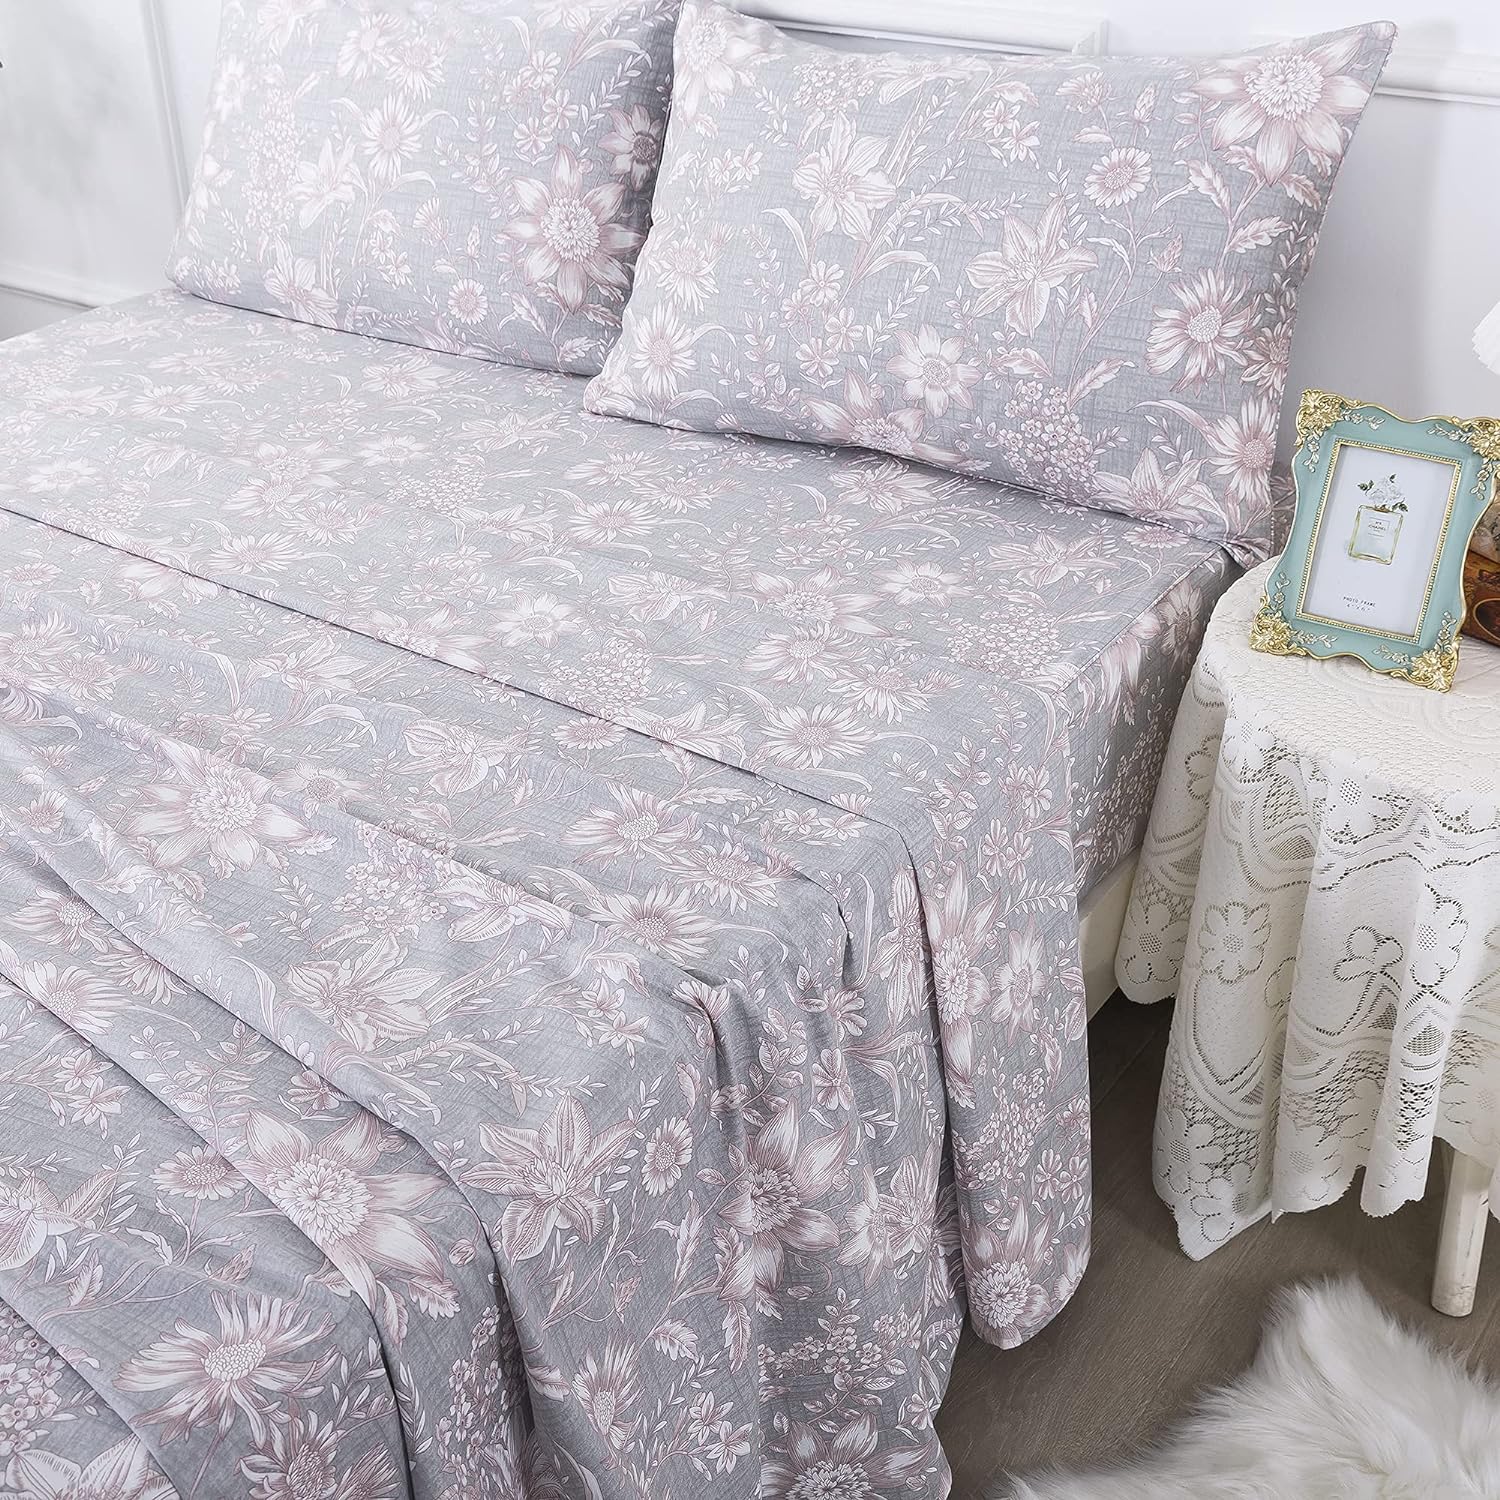 FADFAY Sheets Set Twin Shabby Pink and Grey Floral Bedding Vintage Sunflower Bedding 600TC Elegant Summer Bedding 100% Cotton Super Soft Hypoallergenic Deep Pocket Bed Sheets Set, 4Pcs-Twin Size